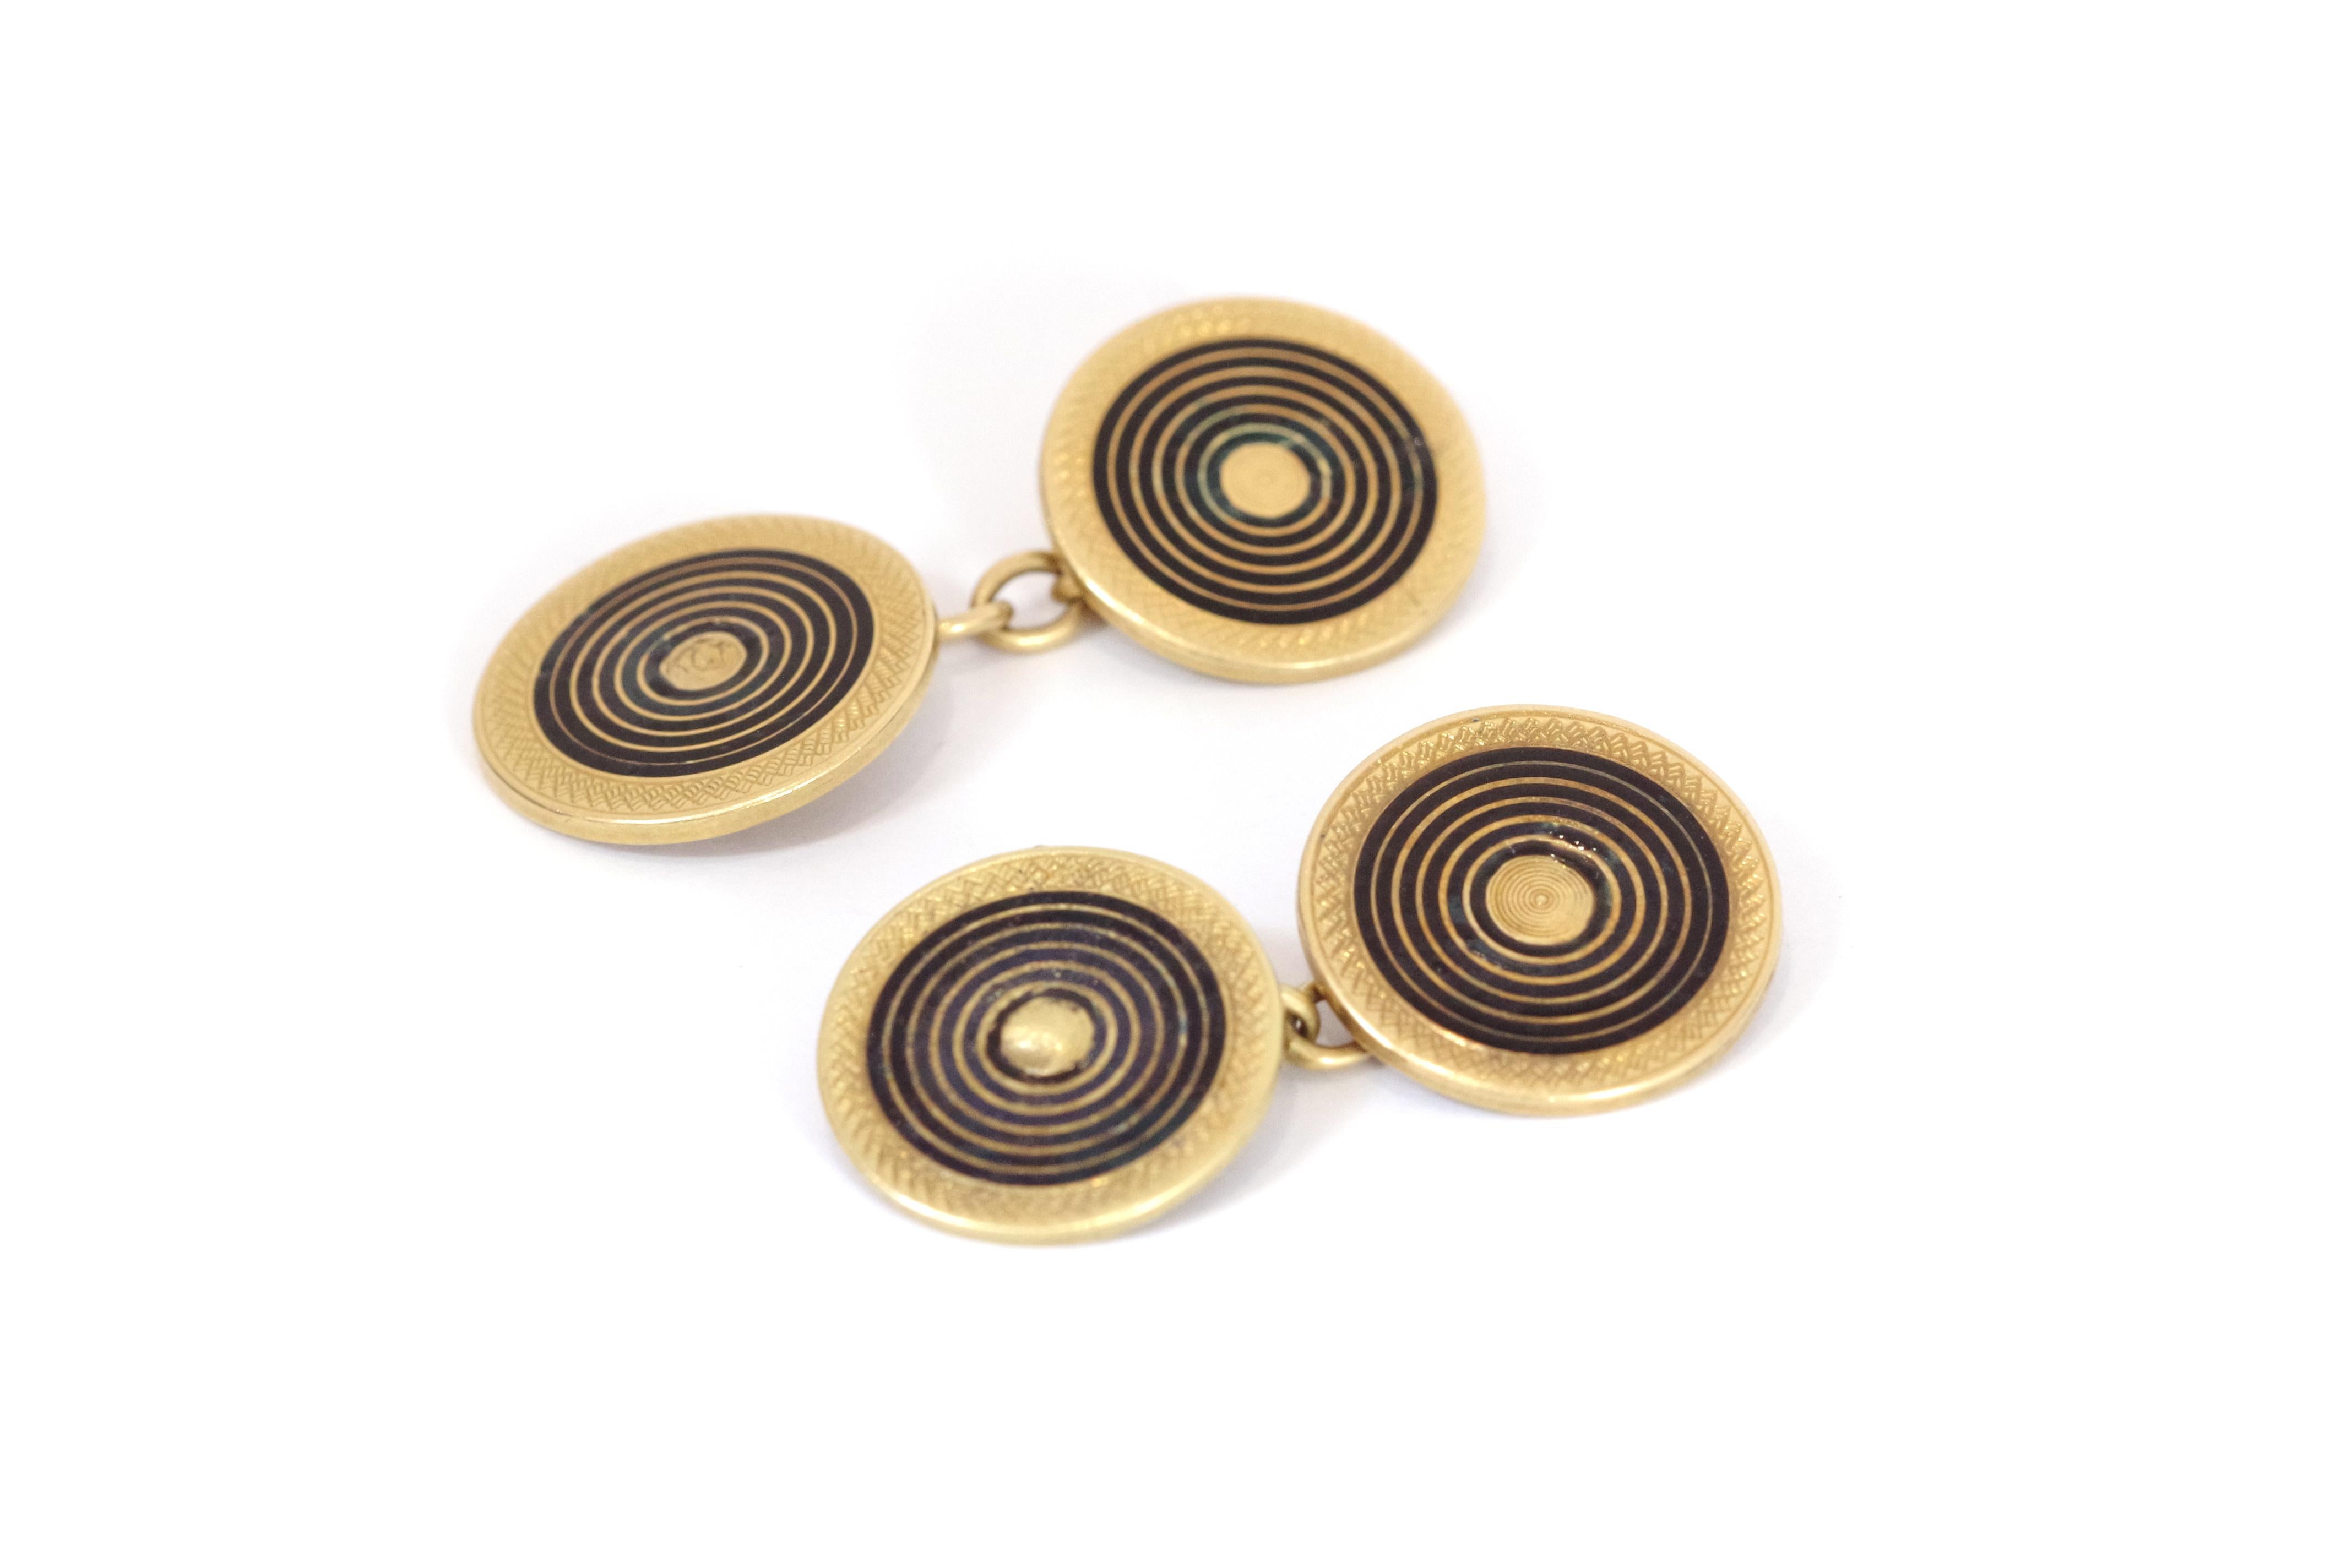 Art Deco enameld cufflinks are made of 18 karat yellow gold and feature a circular design with black enamel concentric circles on a gold background, creating a target-like pattern. The edges of the gold circles are adorned with notched borders.